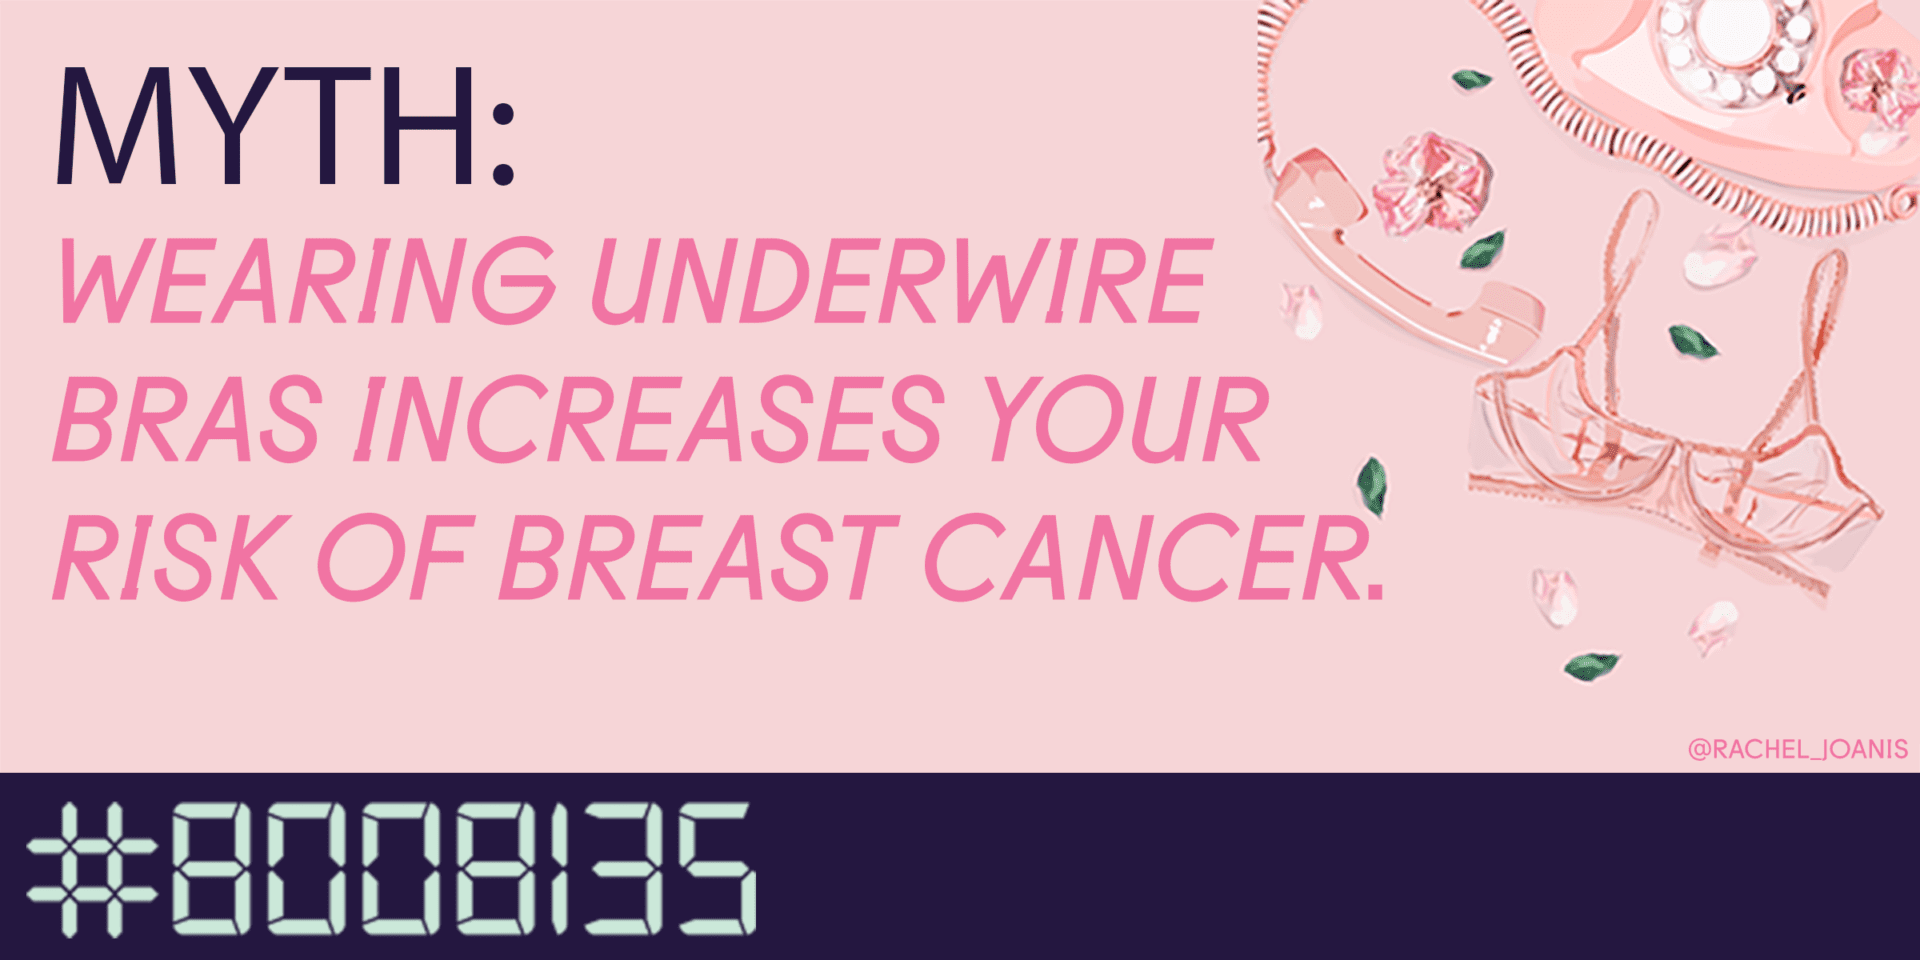 Myth: Wearing underwire bras increases your risk of breast cancer